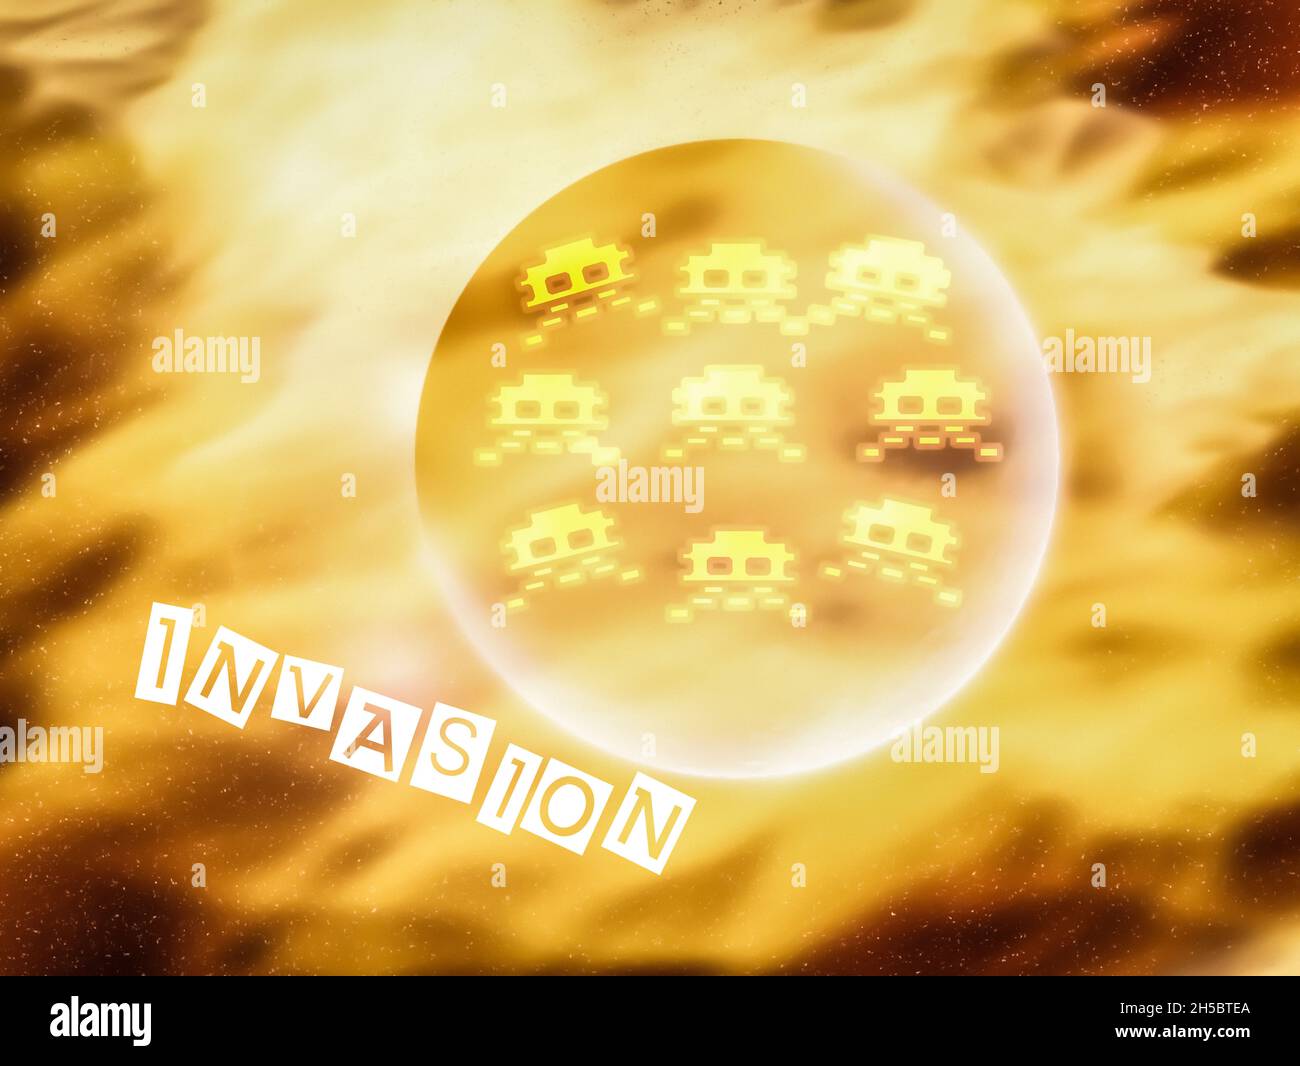 Planet on fire in deep space with 8-bit alien Invaders, Invasion written in white text Stock Photo